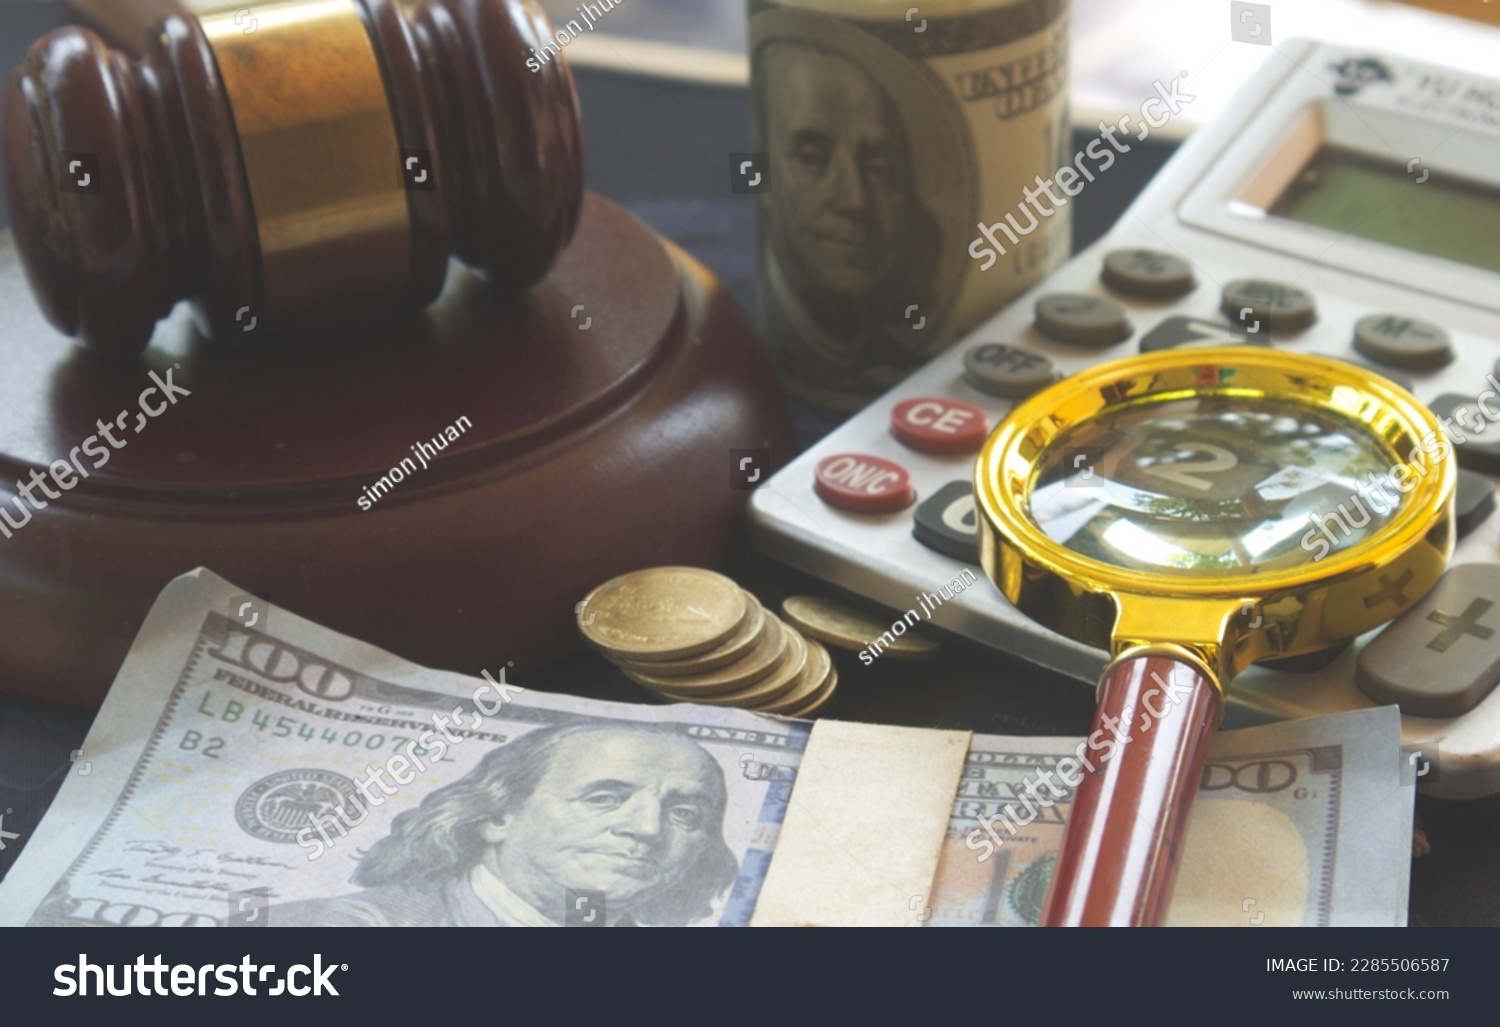 financial dispute arises when there is a disagreement or conflict over monetary matters, such as payments, contracts, or investments, and requires resolution through negotiation, mediation, or legal. #2285506587